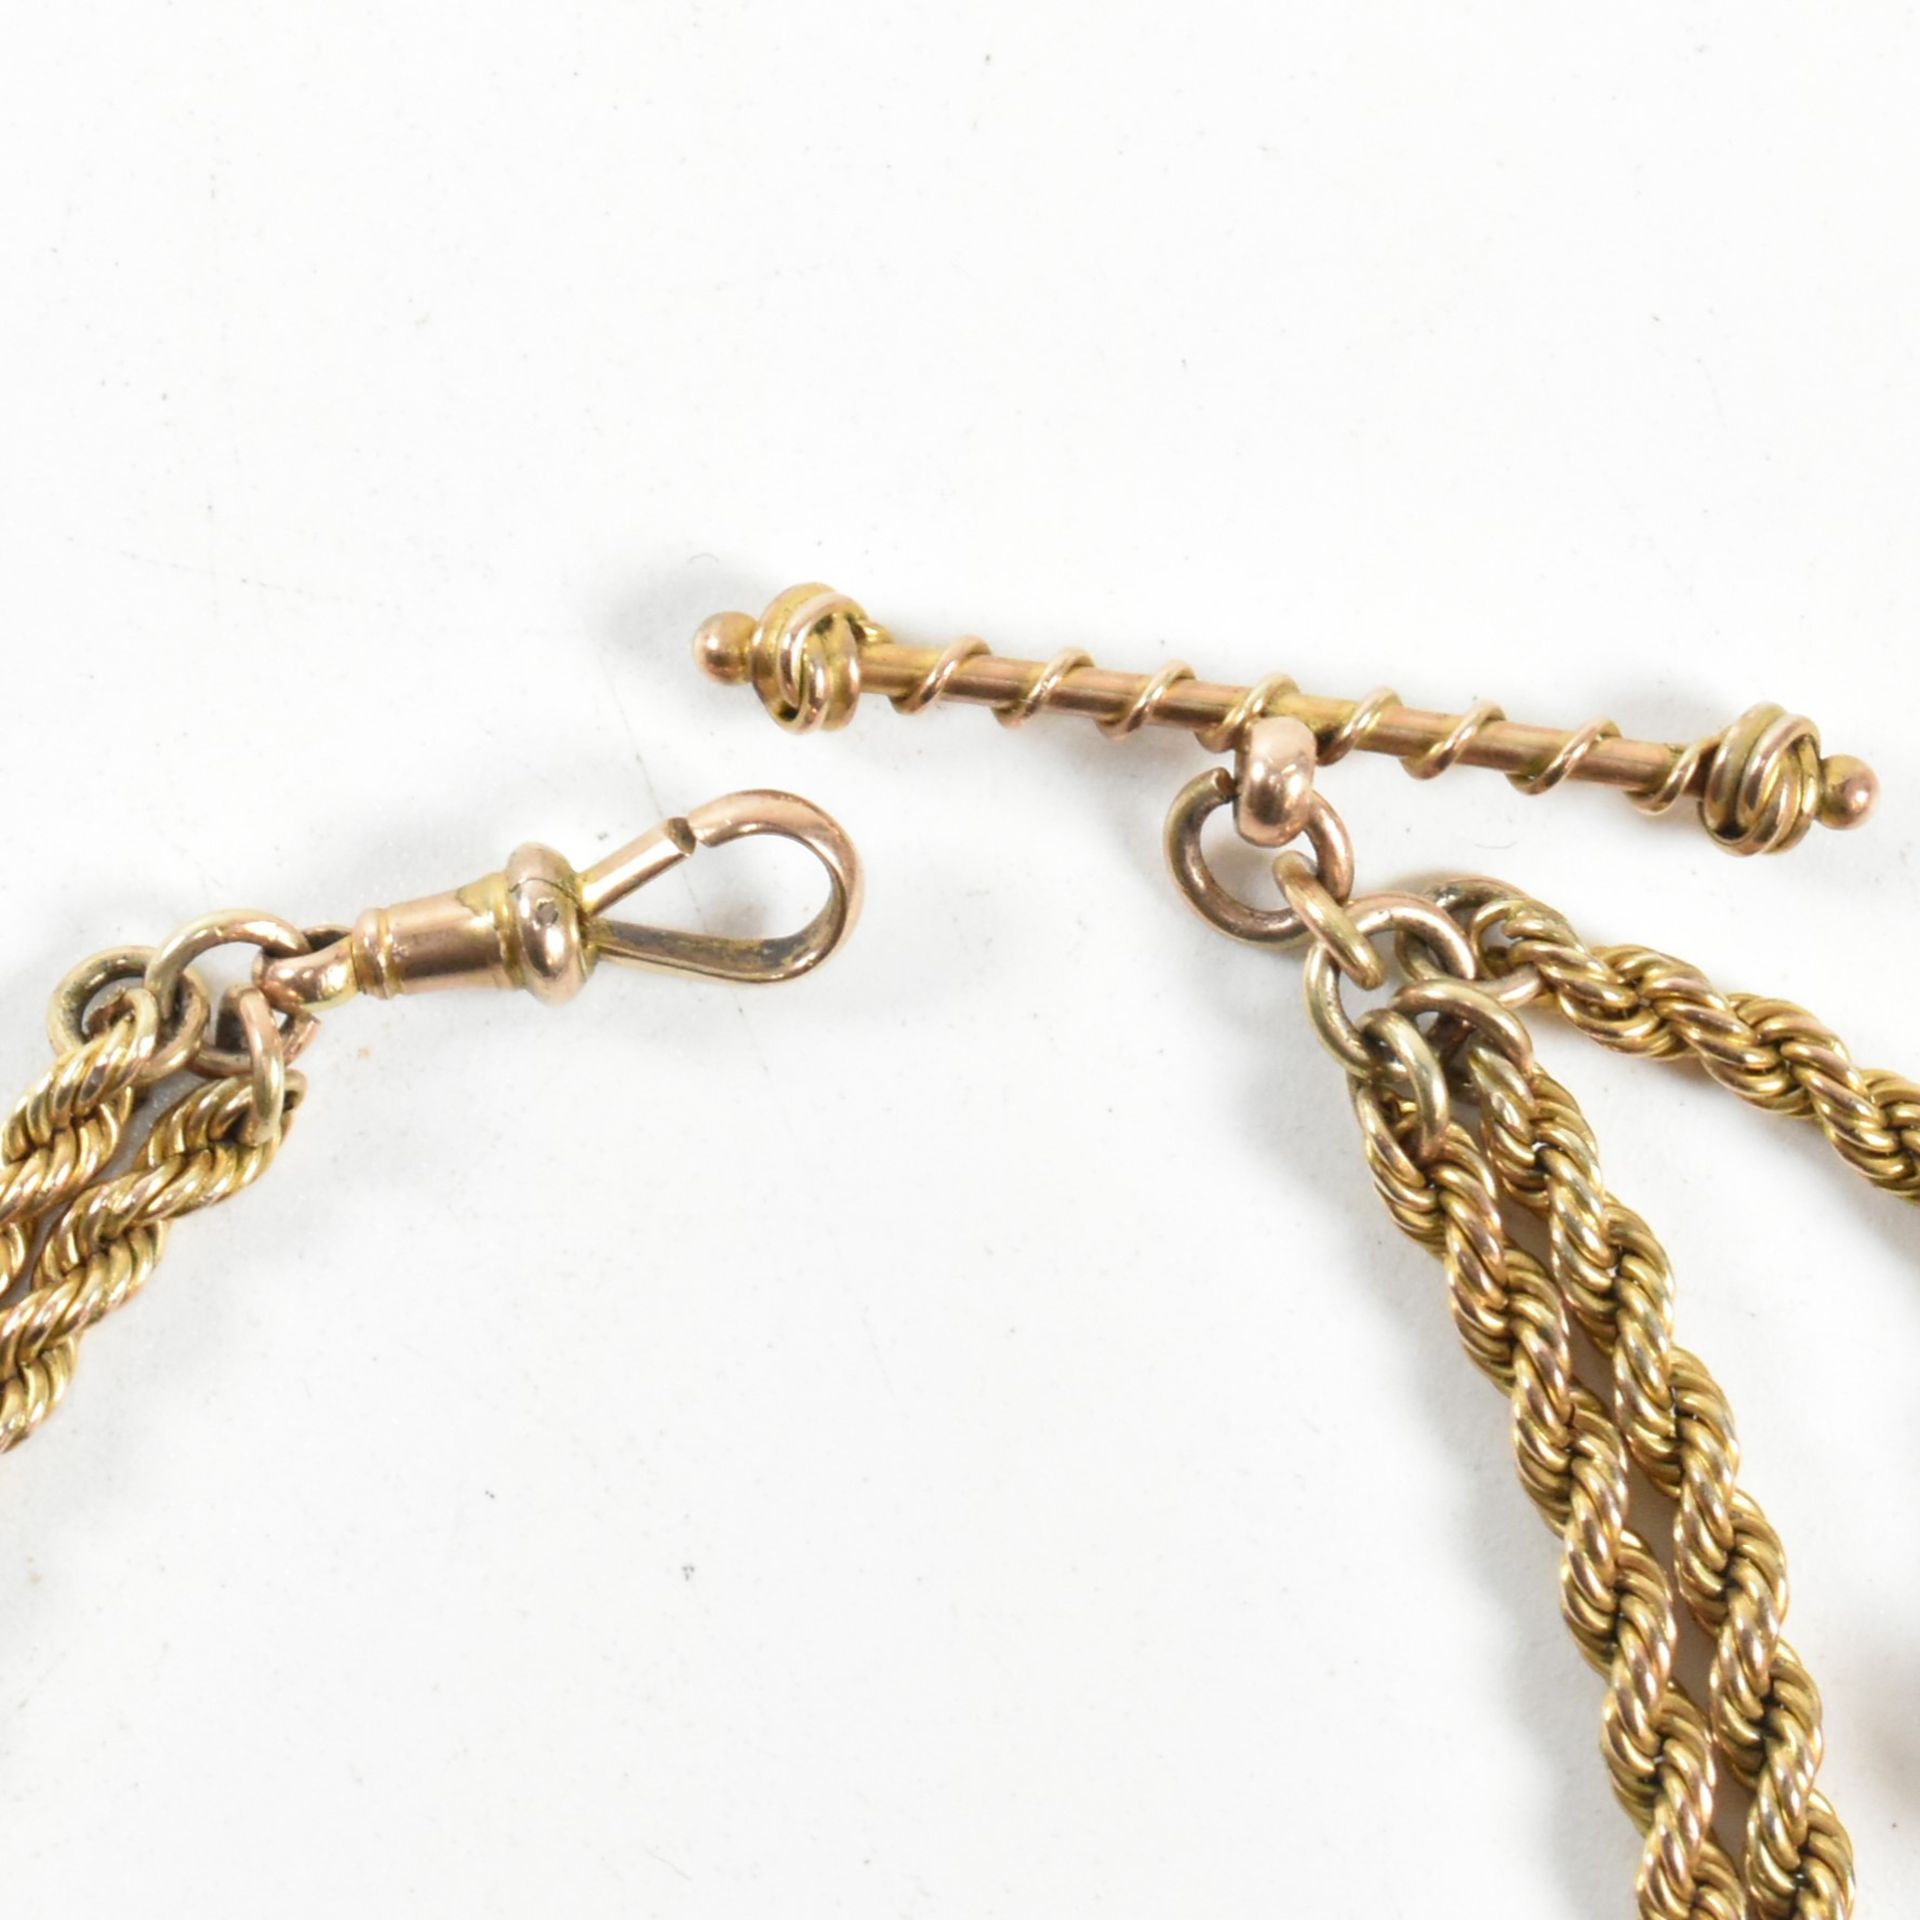 VICTORIAN 9CT GOLD LEONTINE WATCH CHAIN - Image 3 of 7